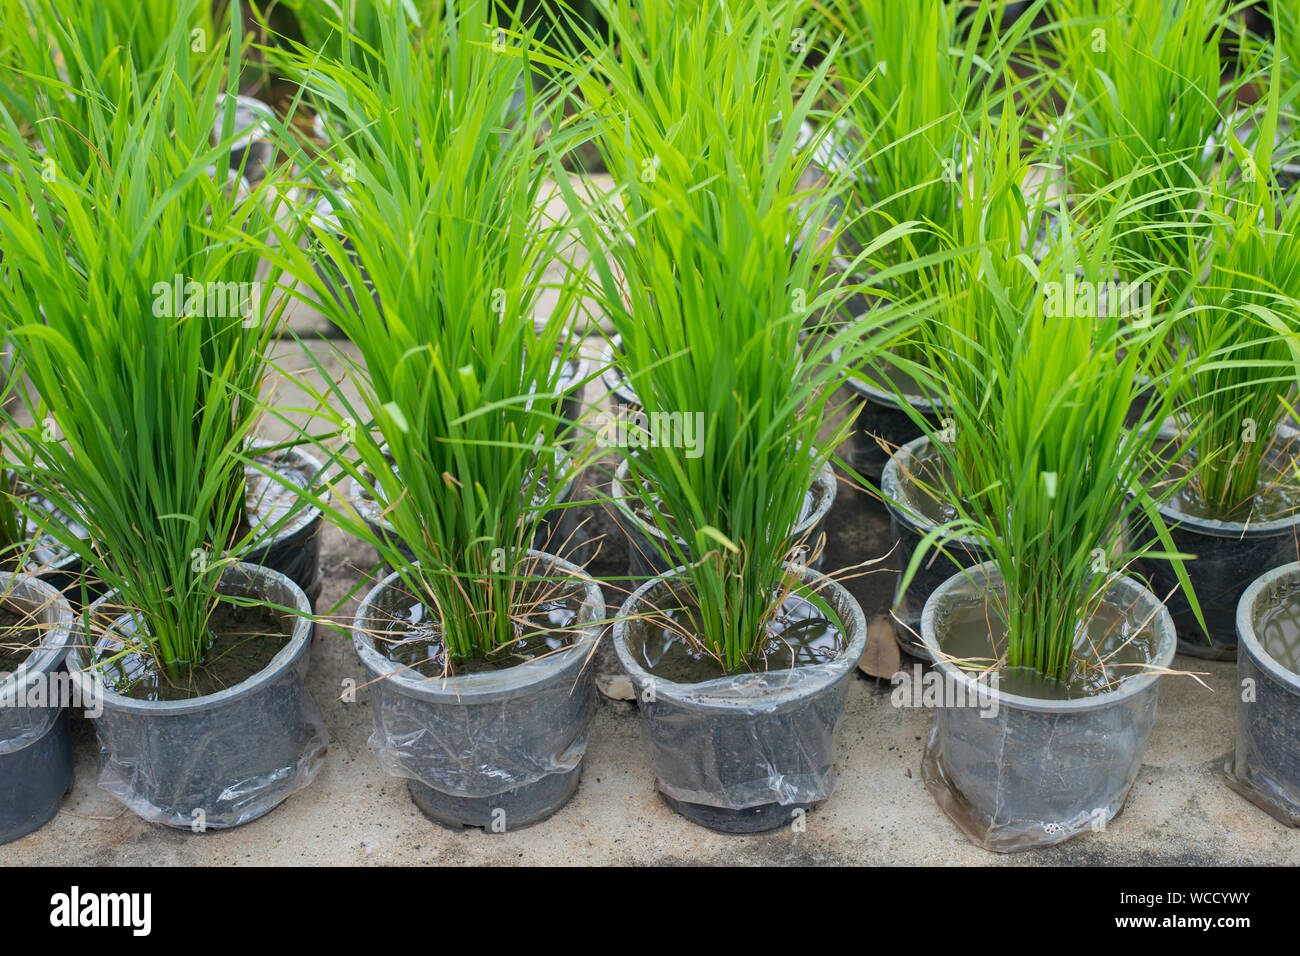 View Of Potted Plants Stock Photo